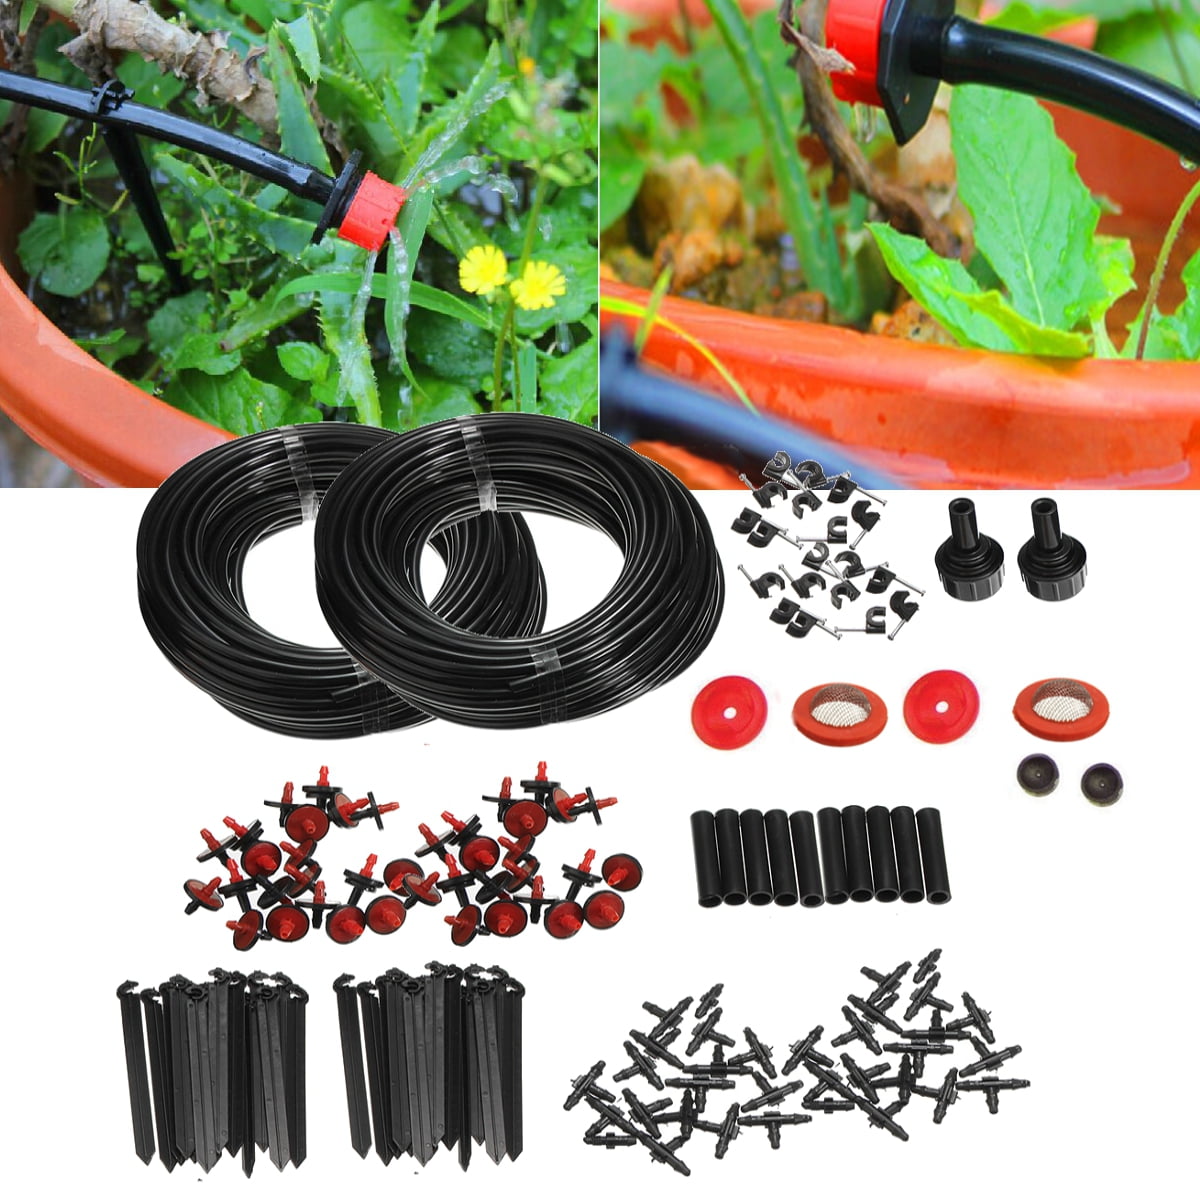 40m Drip Irrigation System Automatic Watering Garden Greenhouse Agriculture Hose 